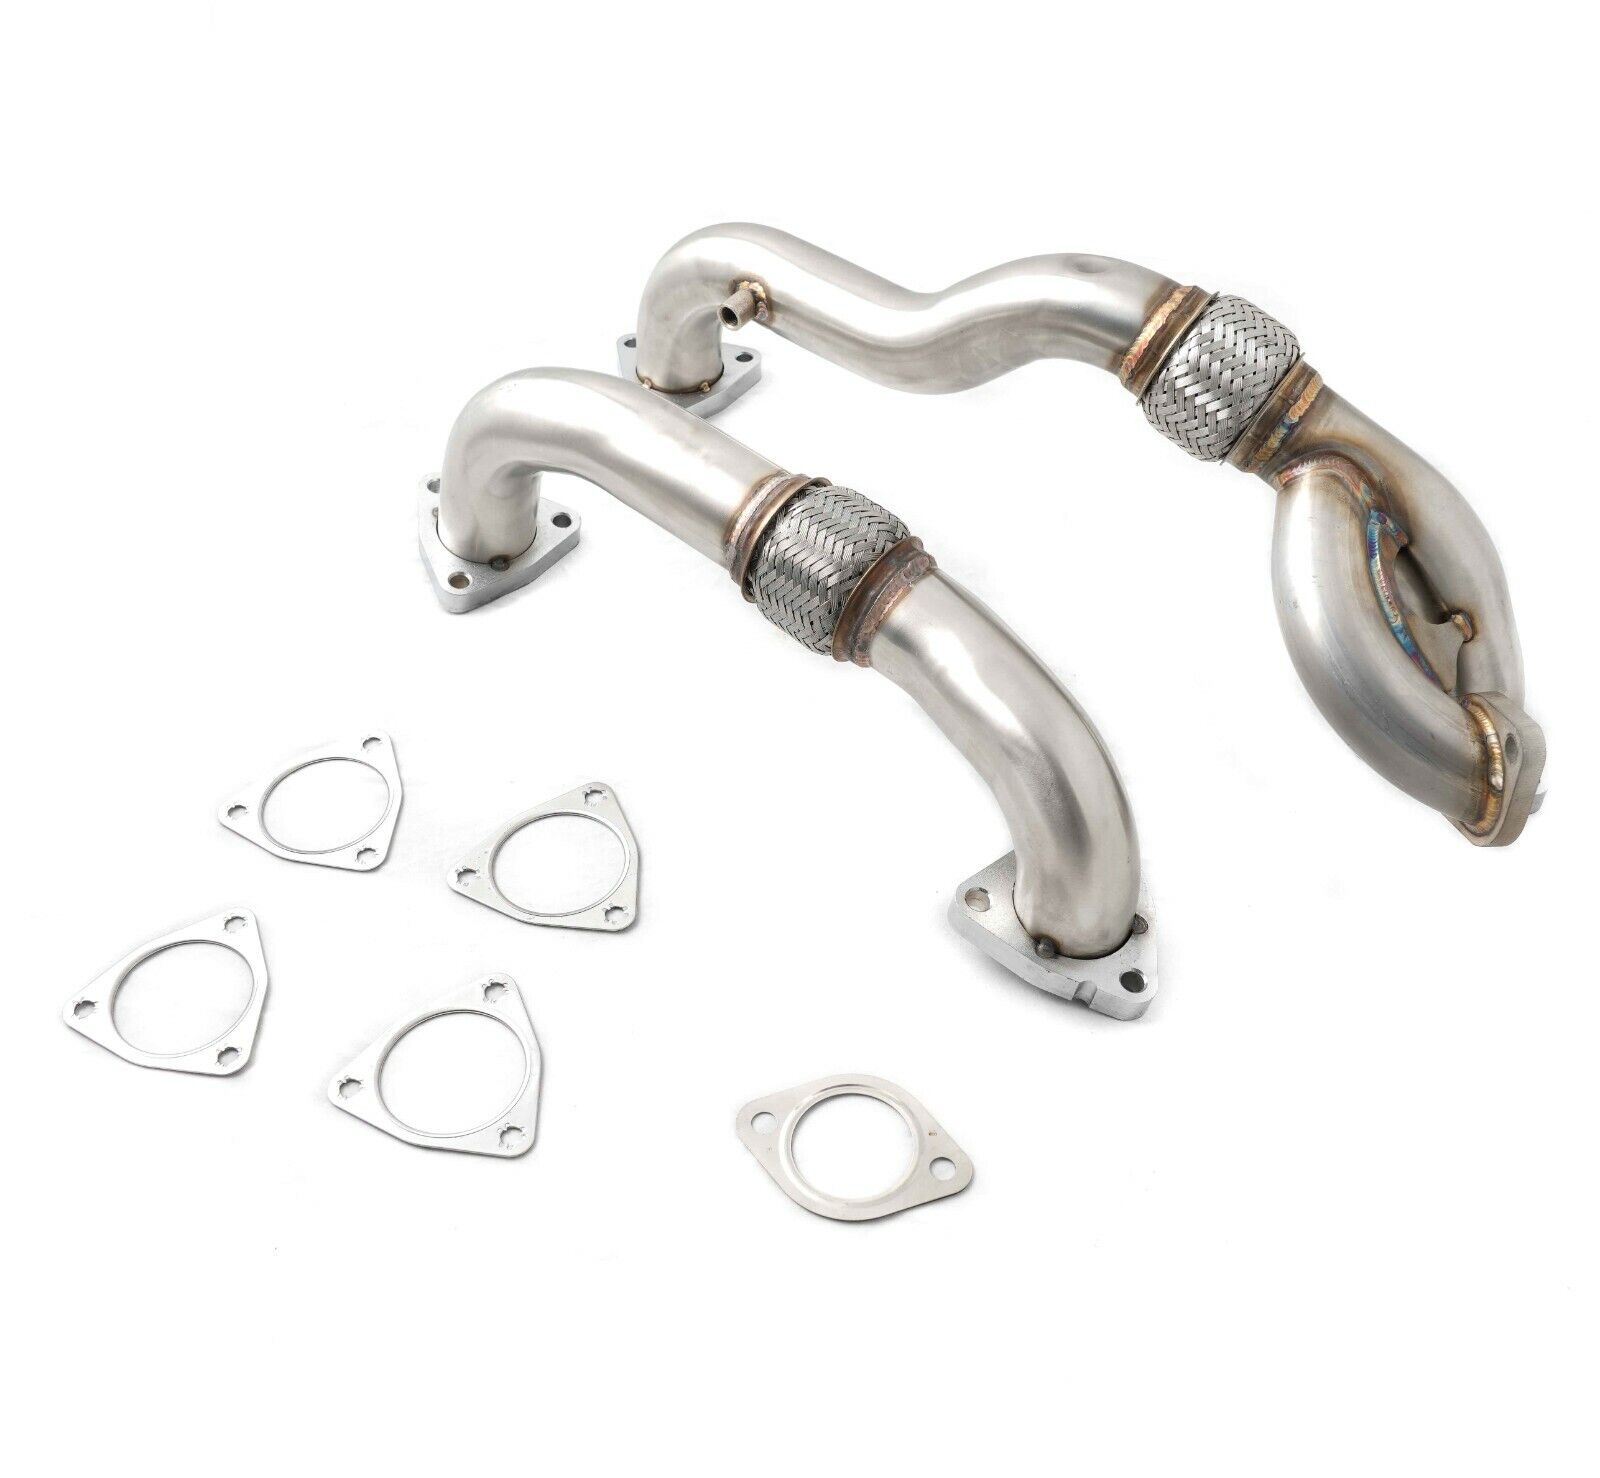 Rudy's Heavy Duty Up Pipes with Gaskets For 08-10 Ford 6.4L Powerstroke Diesel